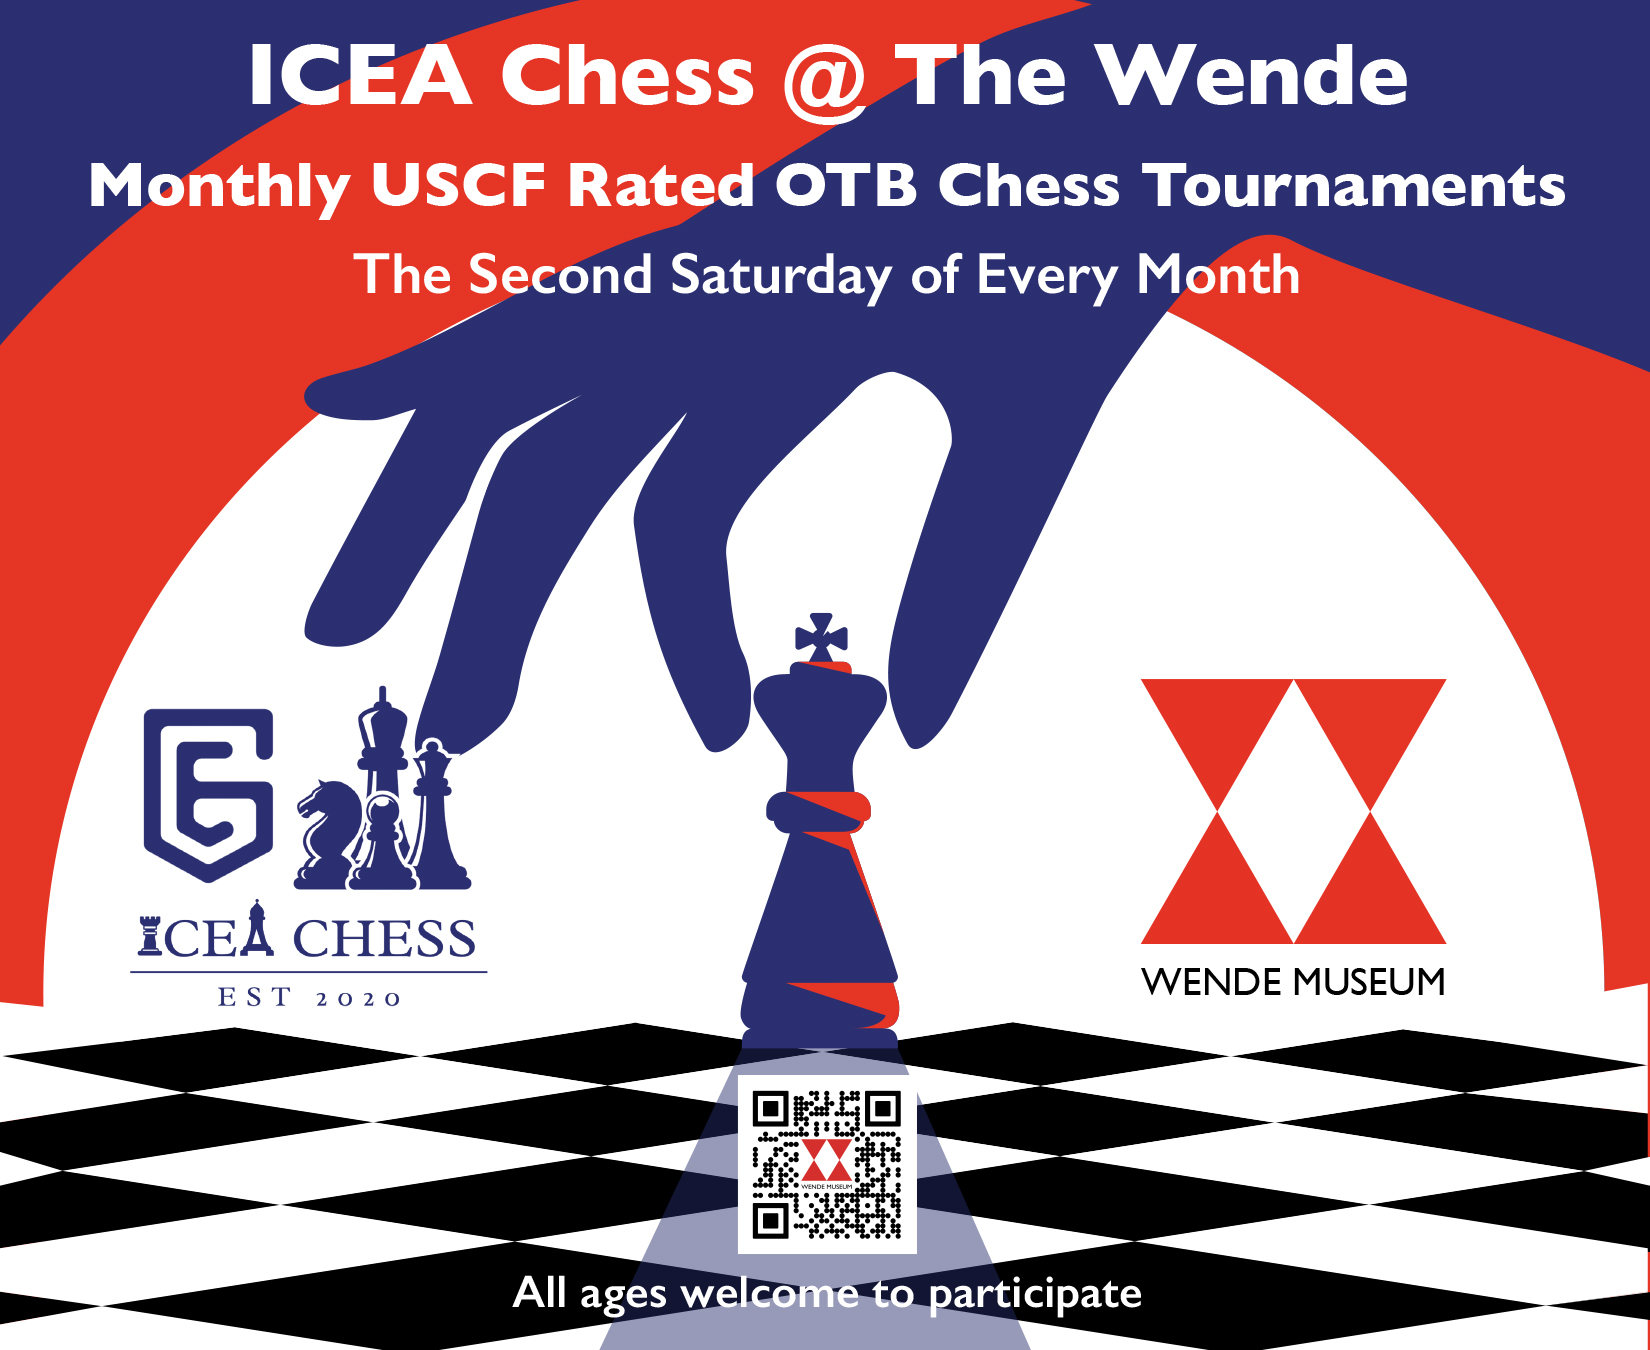 FIDE Online Arena Titles now in use at major OTB tournaments